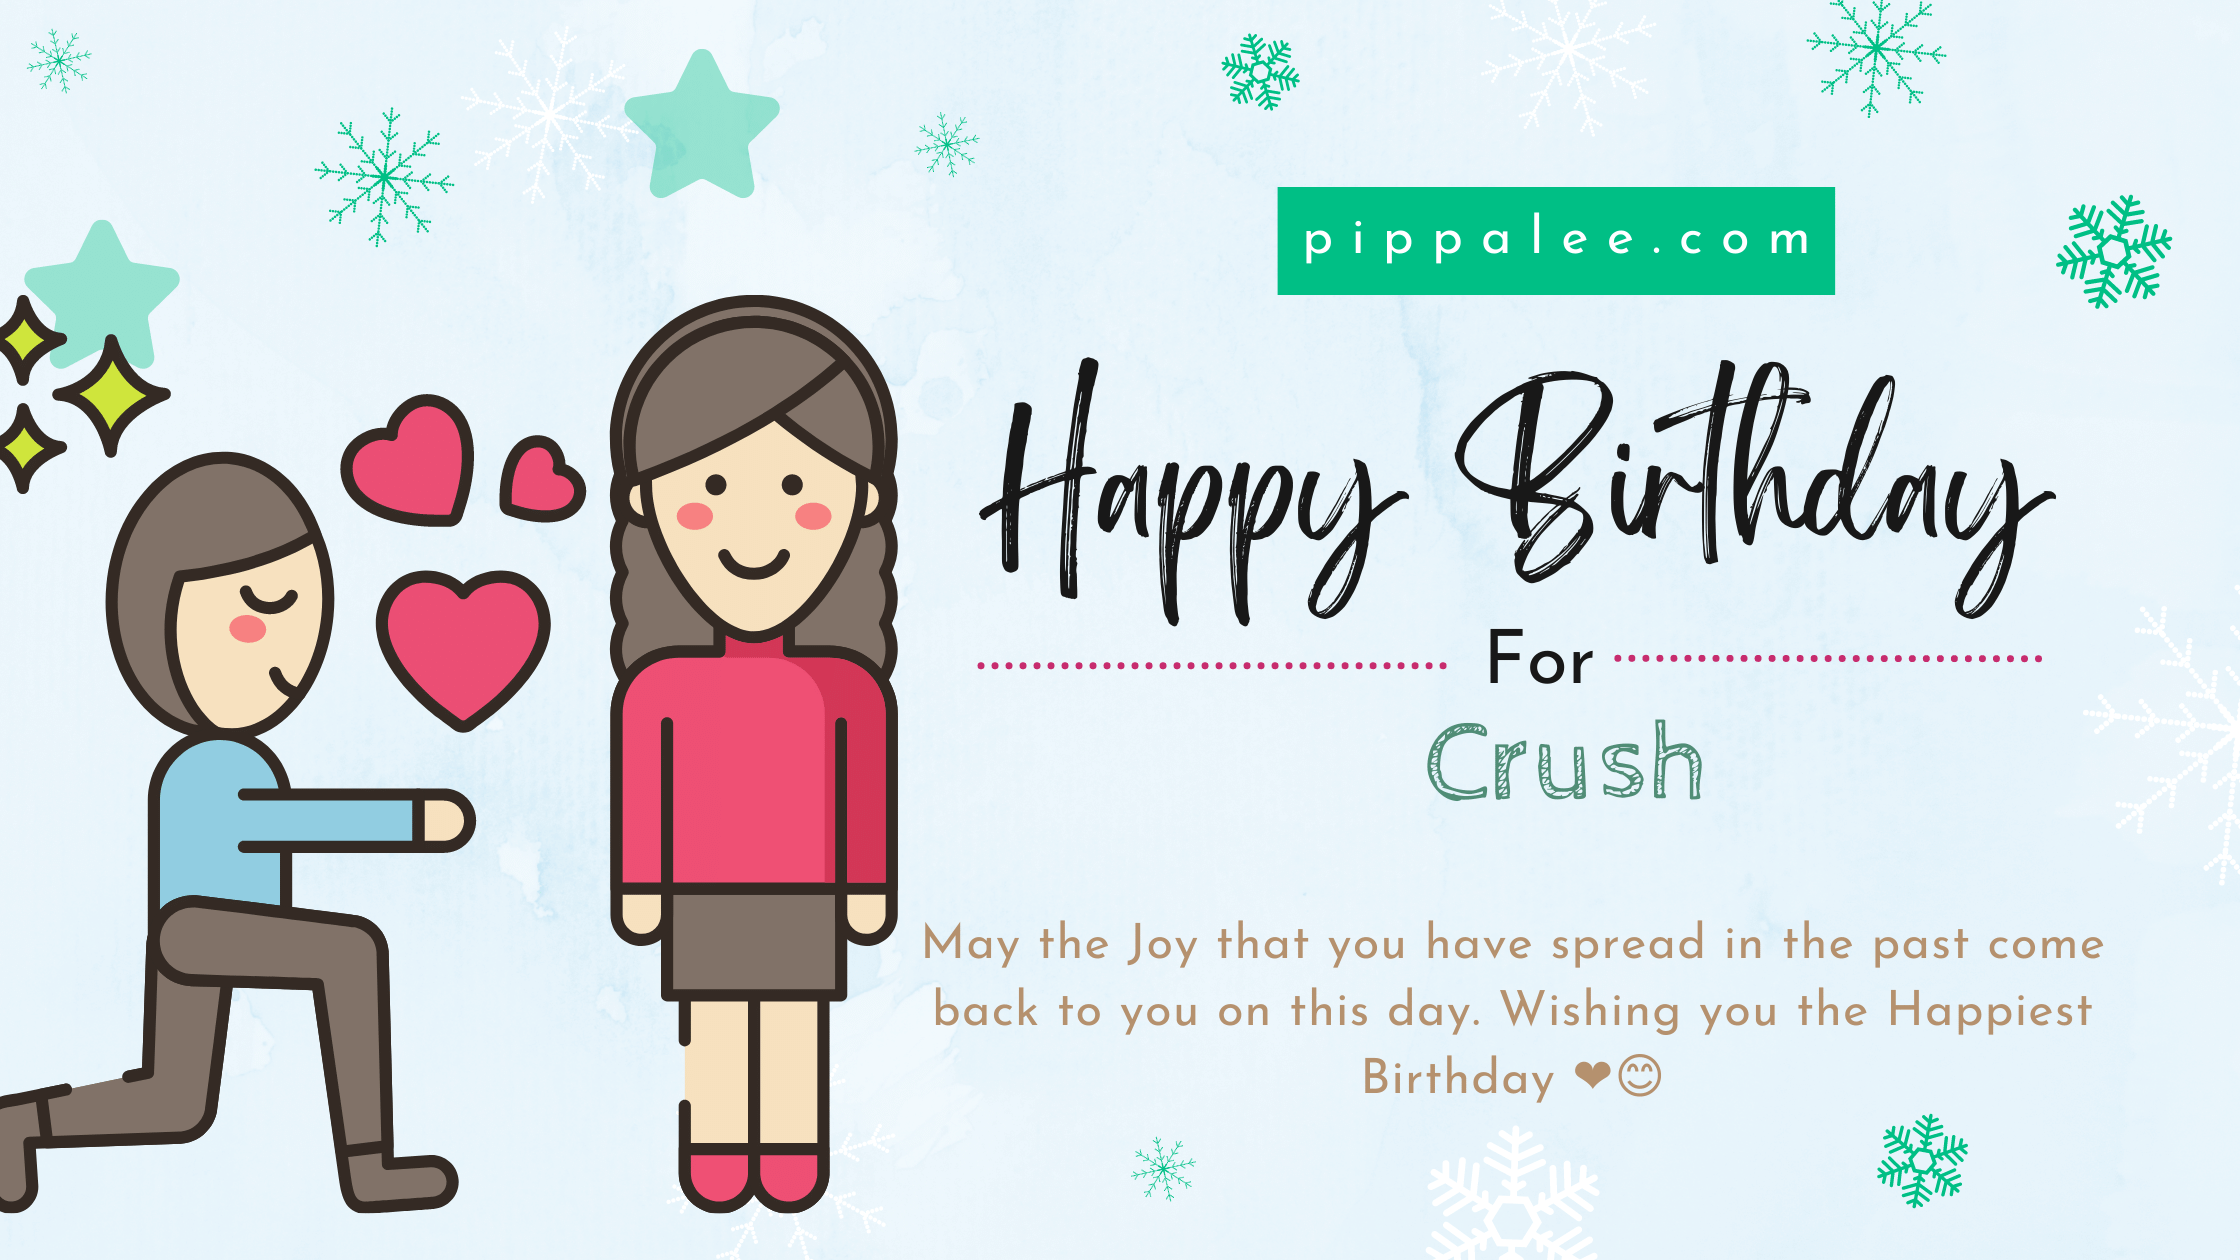 Birthday Wishes For Crush - Wishes & Messages